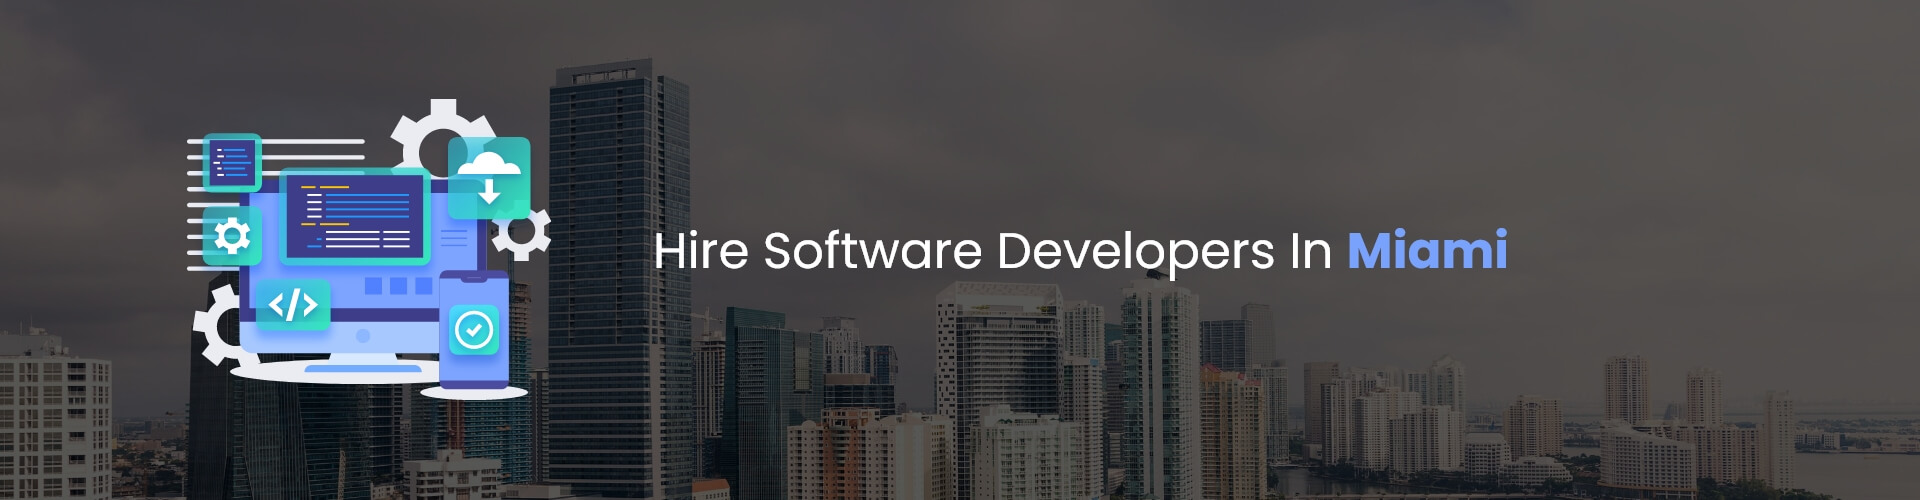 hire software developers in miami